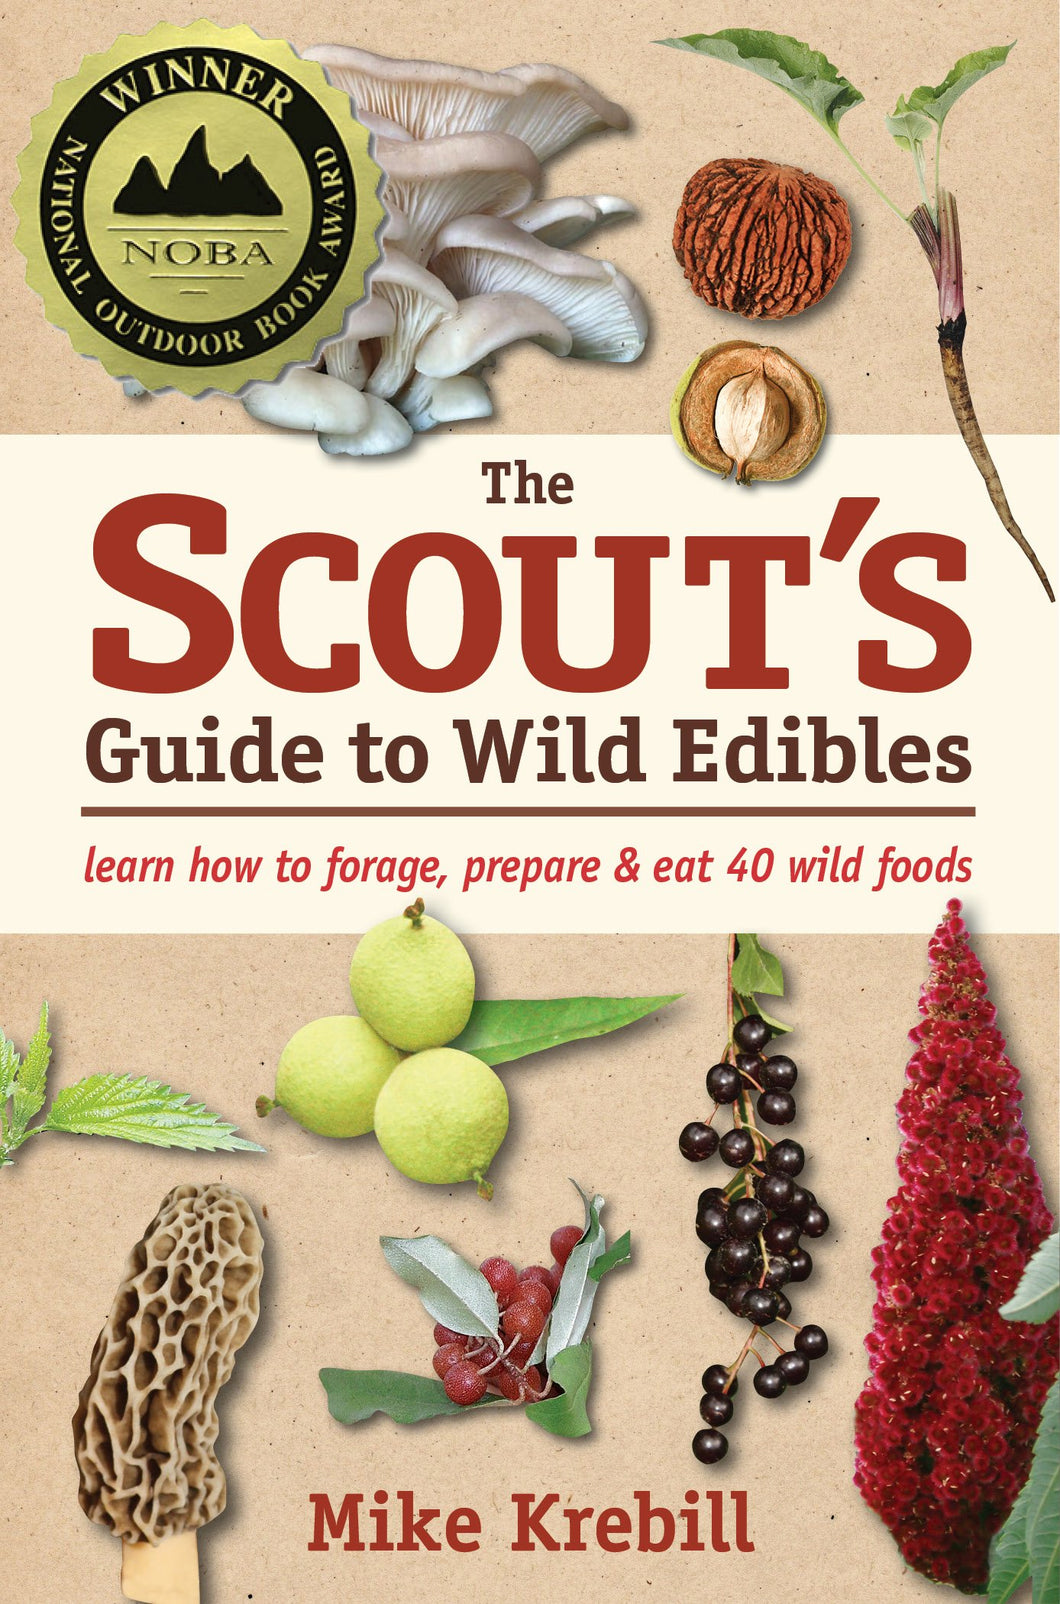 The Scout's Guide to Wild Edibles